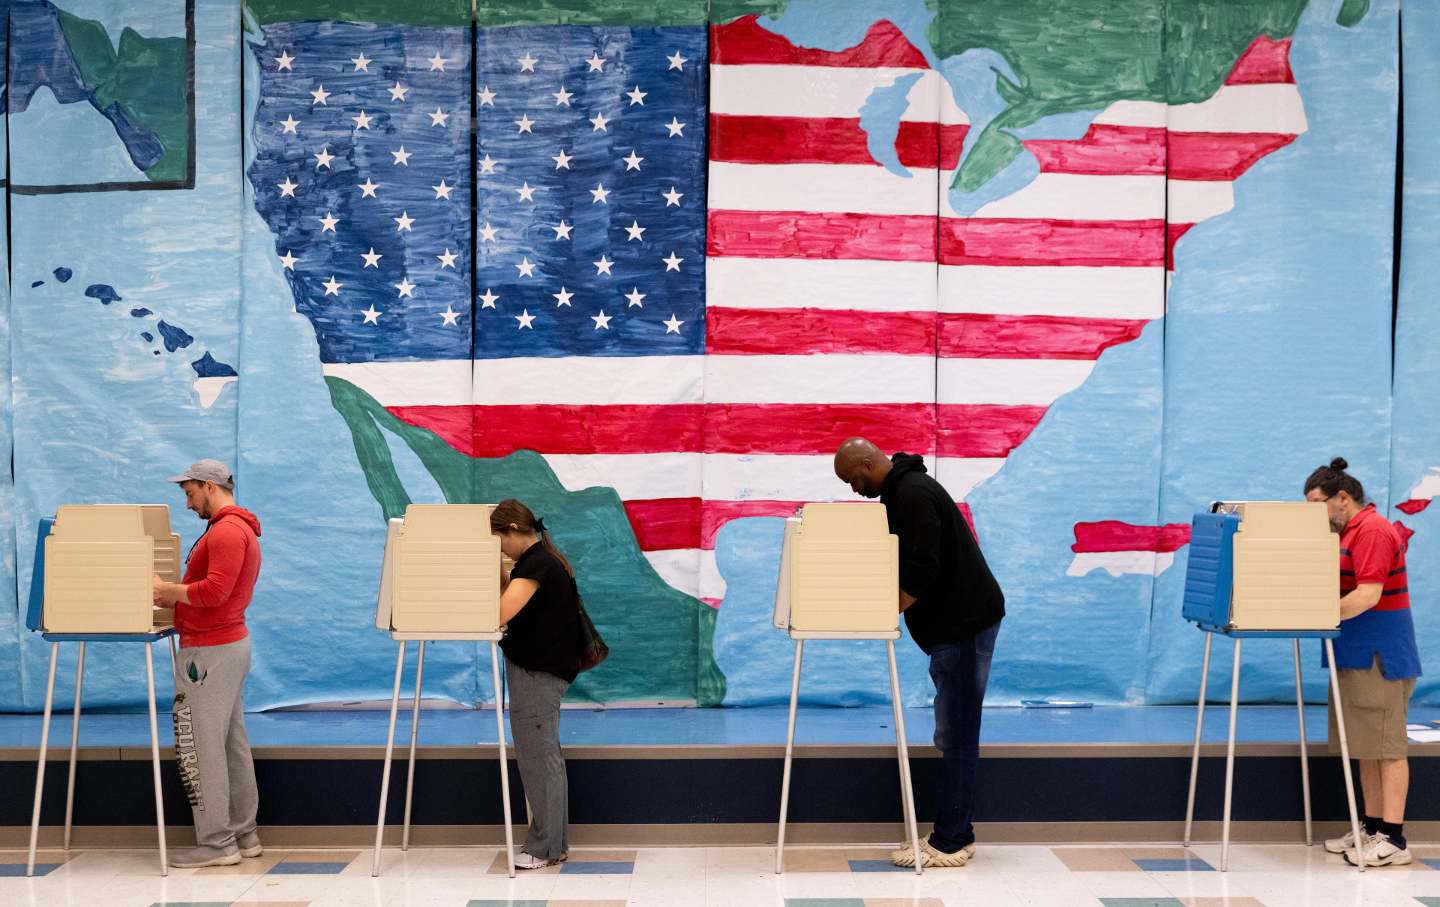 Voters leaning over voting booths in front of an American flag mural.